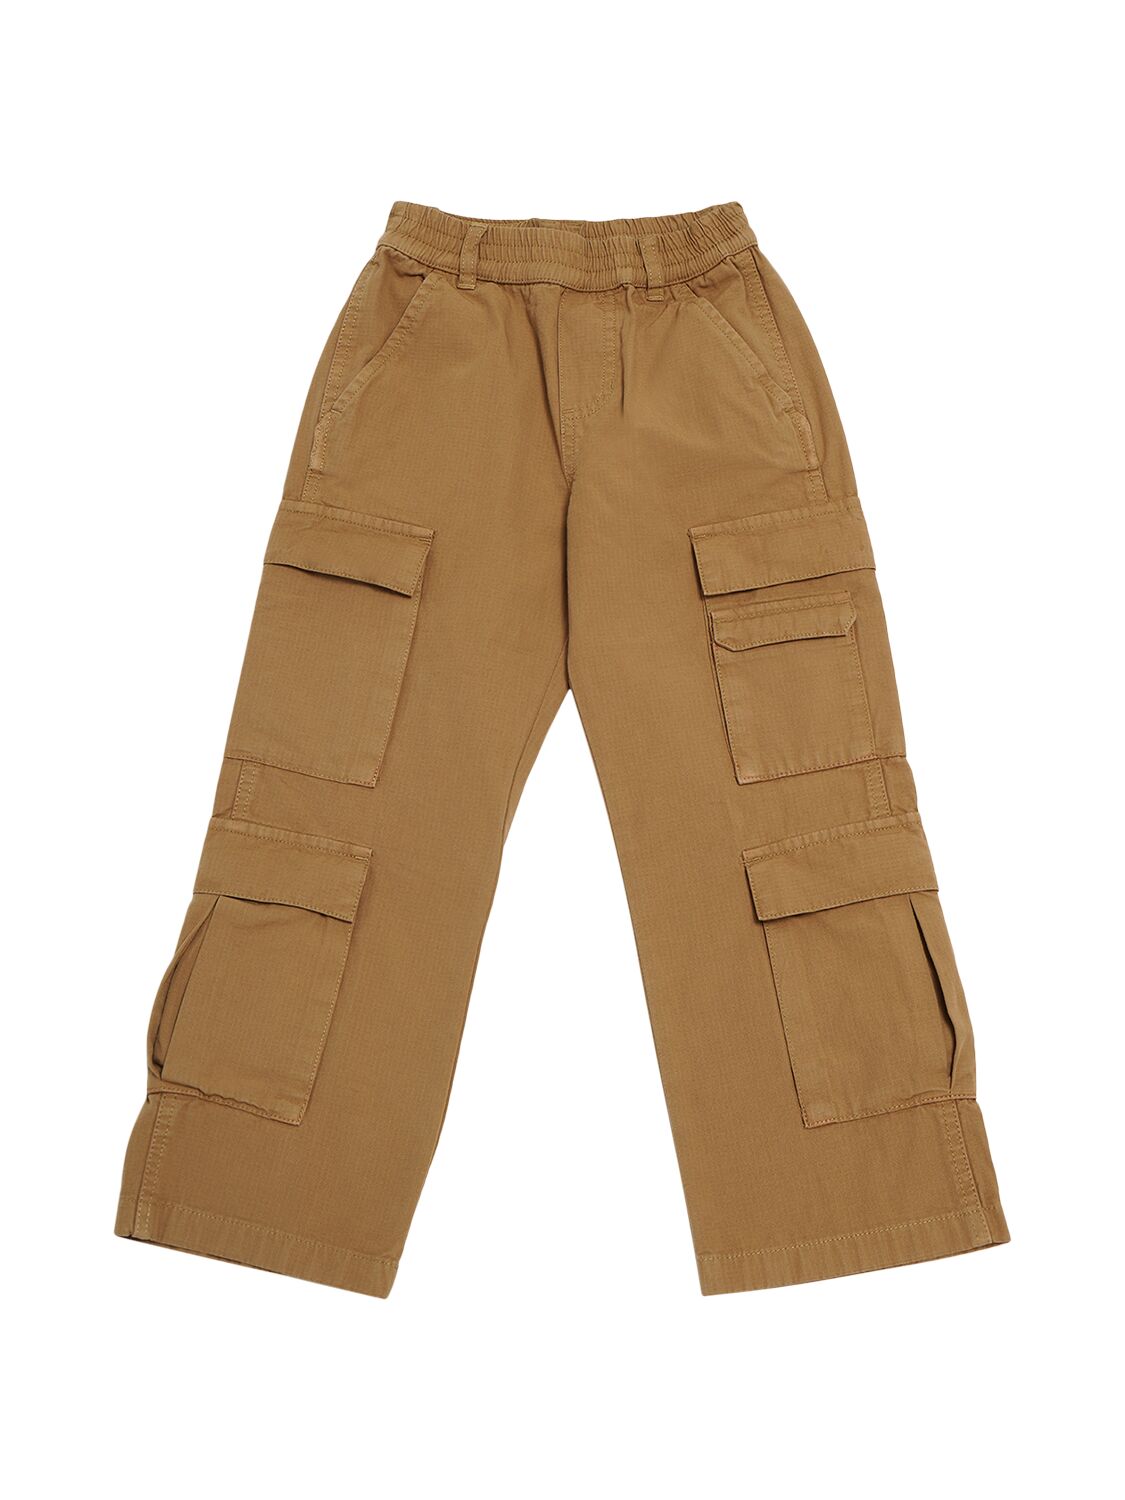 Image of Woven Cotton Cargo Pants